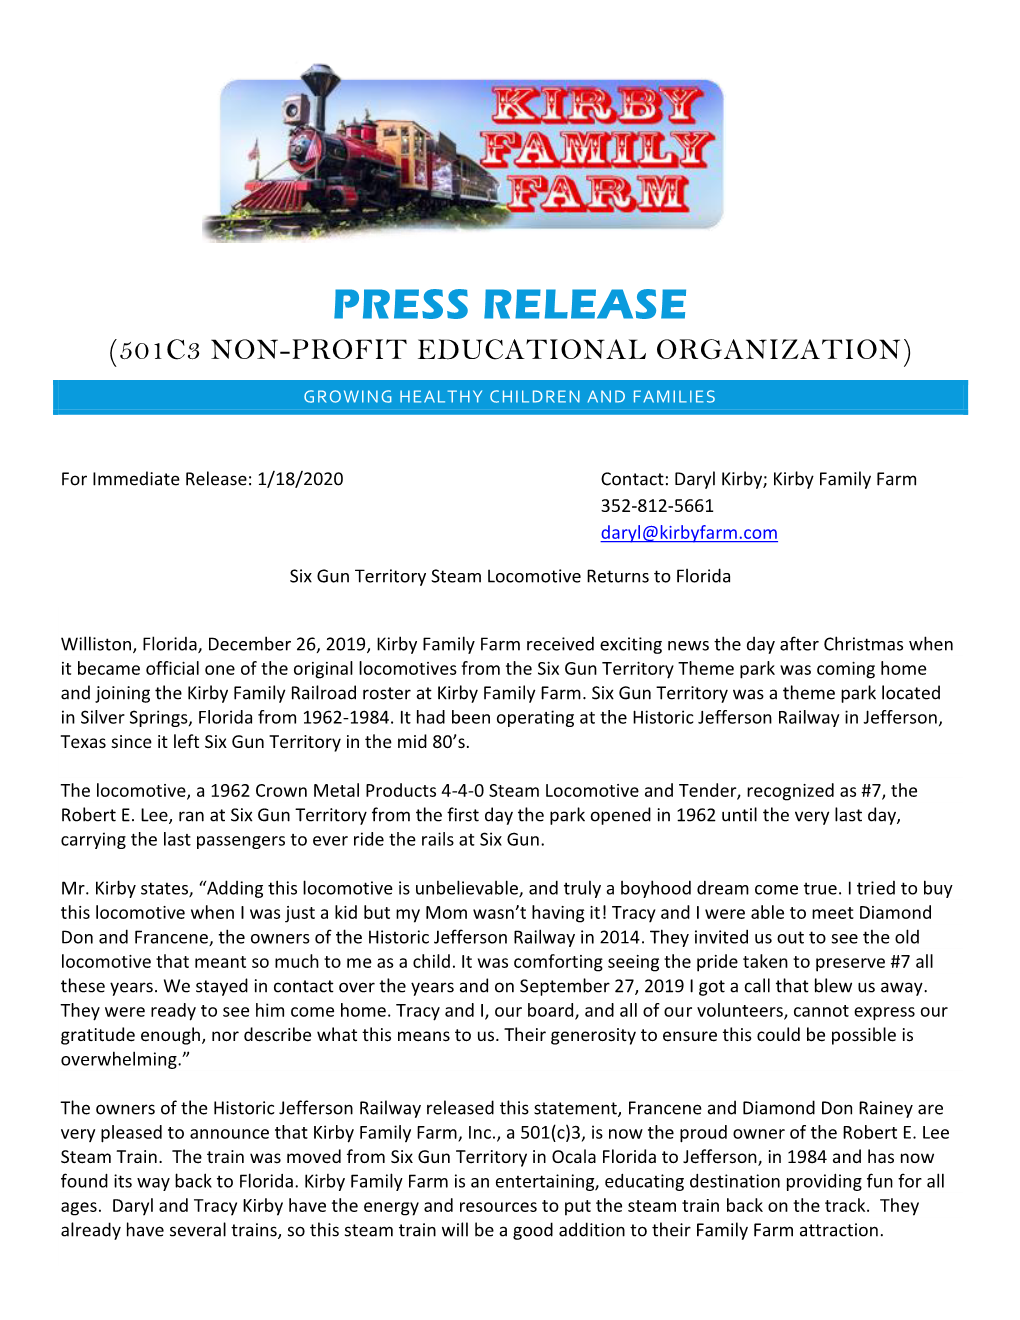 Press Release (501C3 Non-Profit Educational Organization) Growing Healthy Children and Families